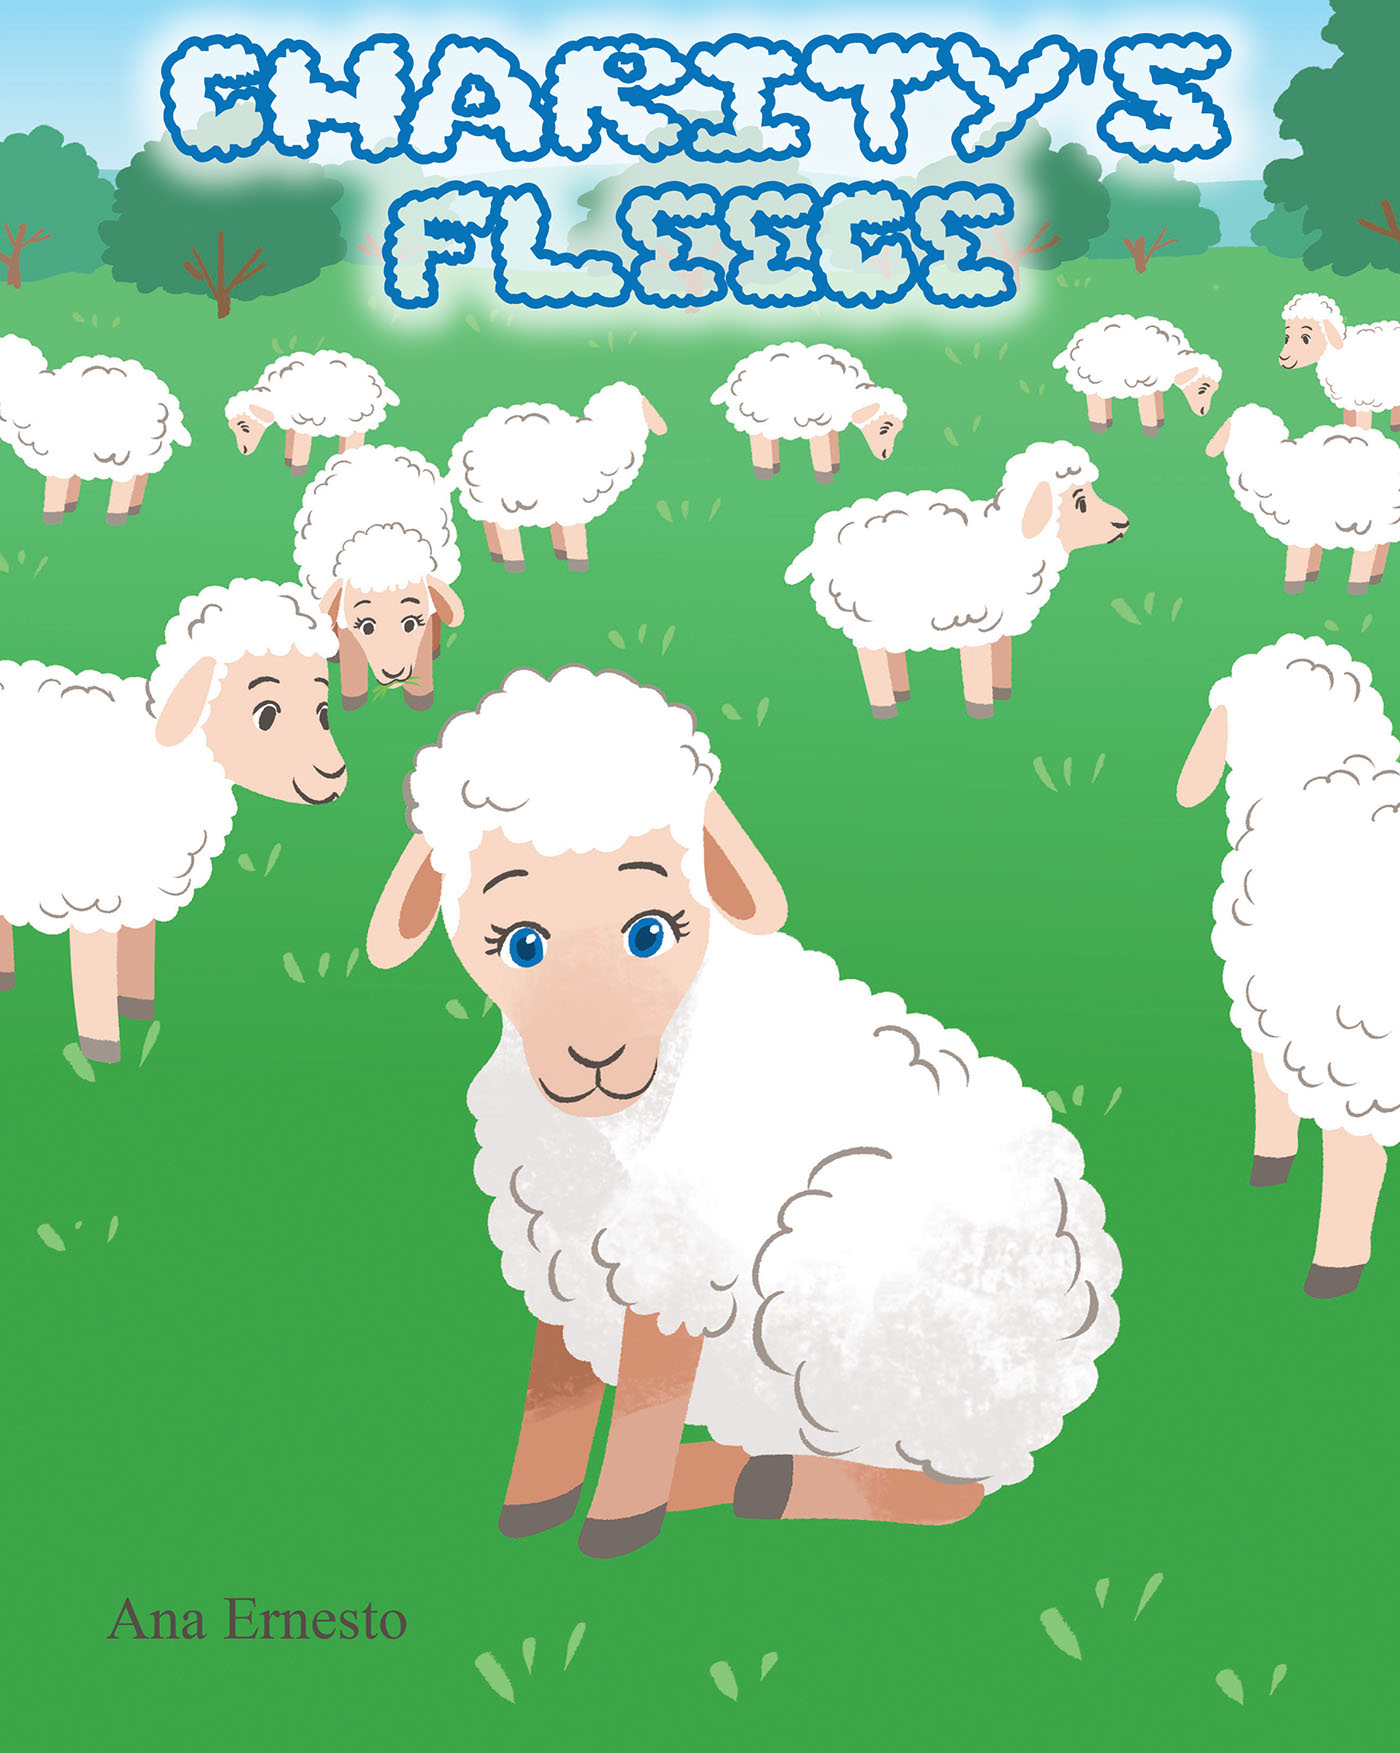 Ana Ernesto’s Newly Released "Charity’s Fleece" is an Imaginative Tale of Unexpected Blessings When a Little Sheep Meets a Special Child